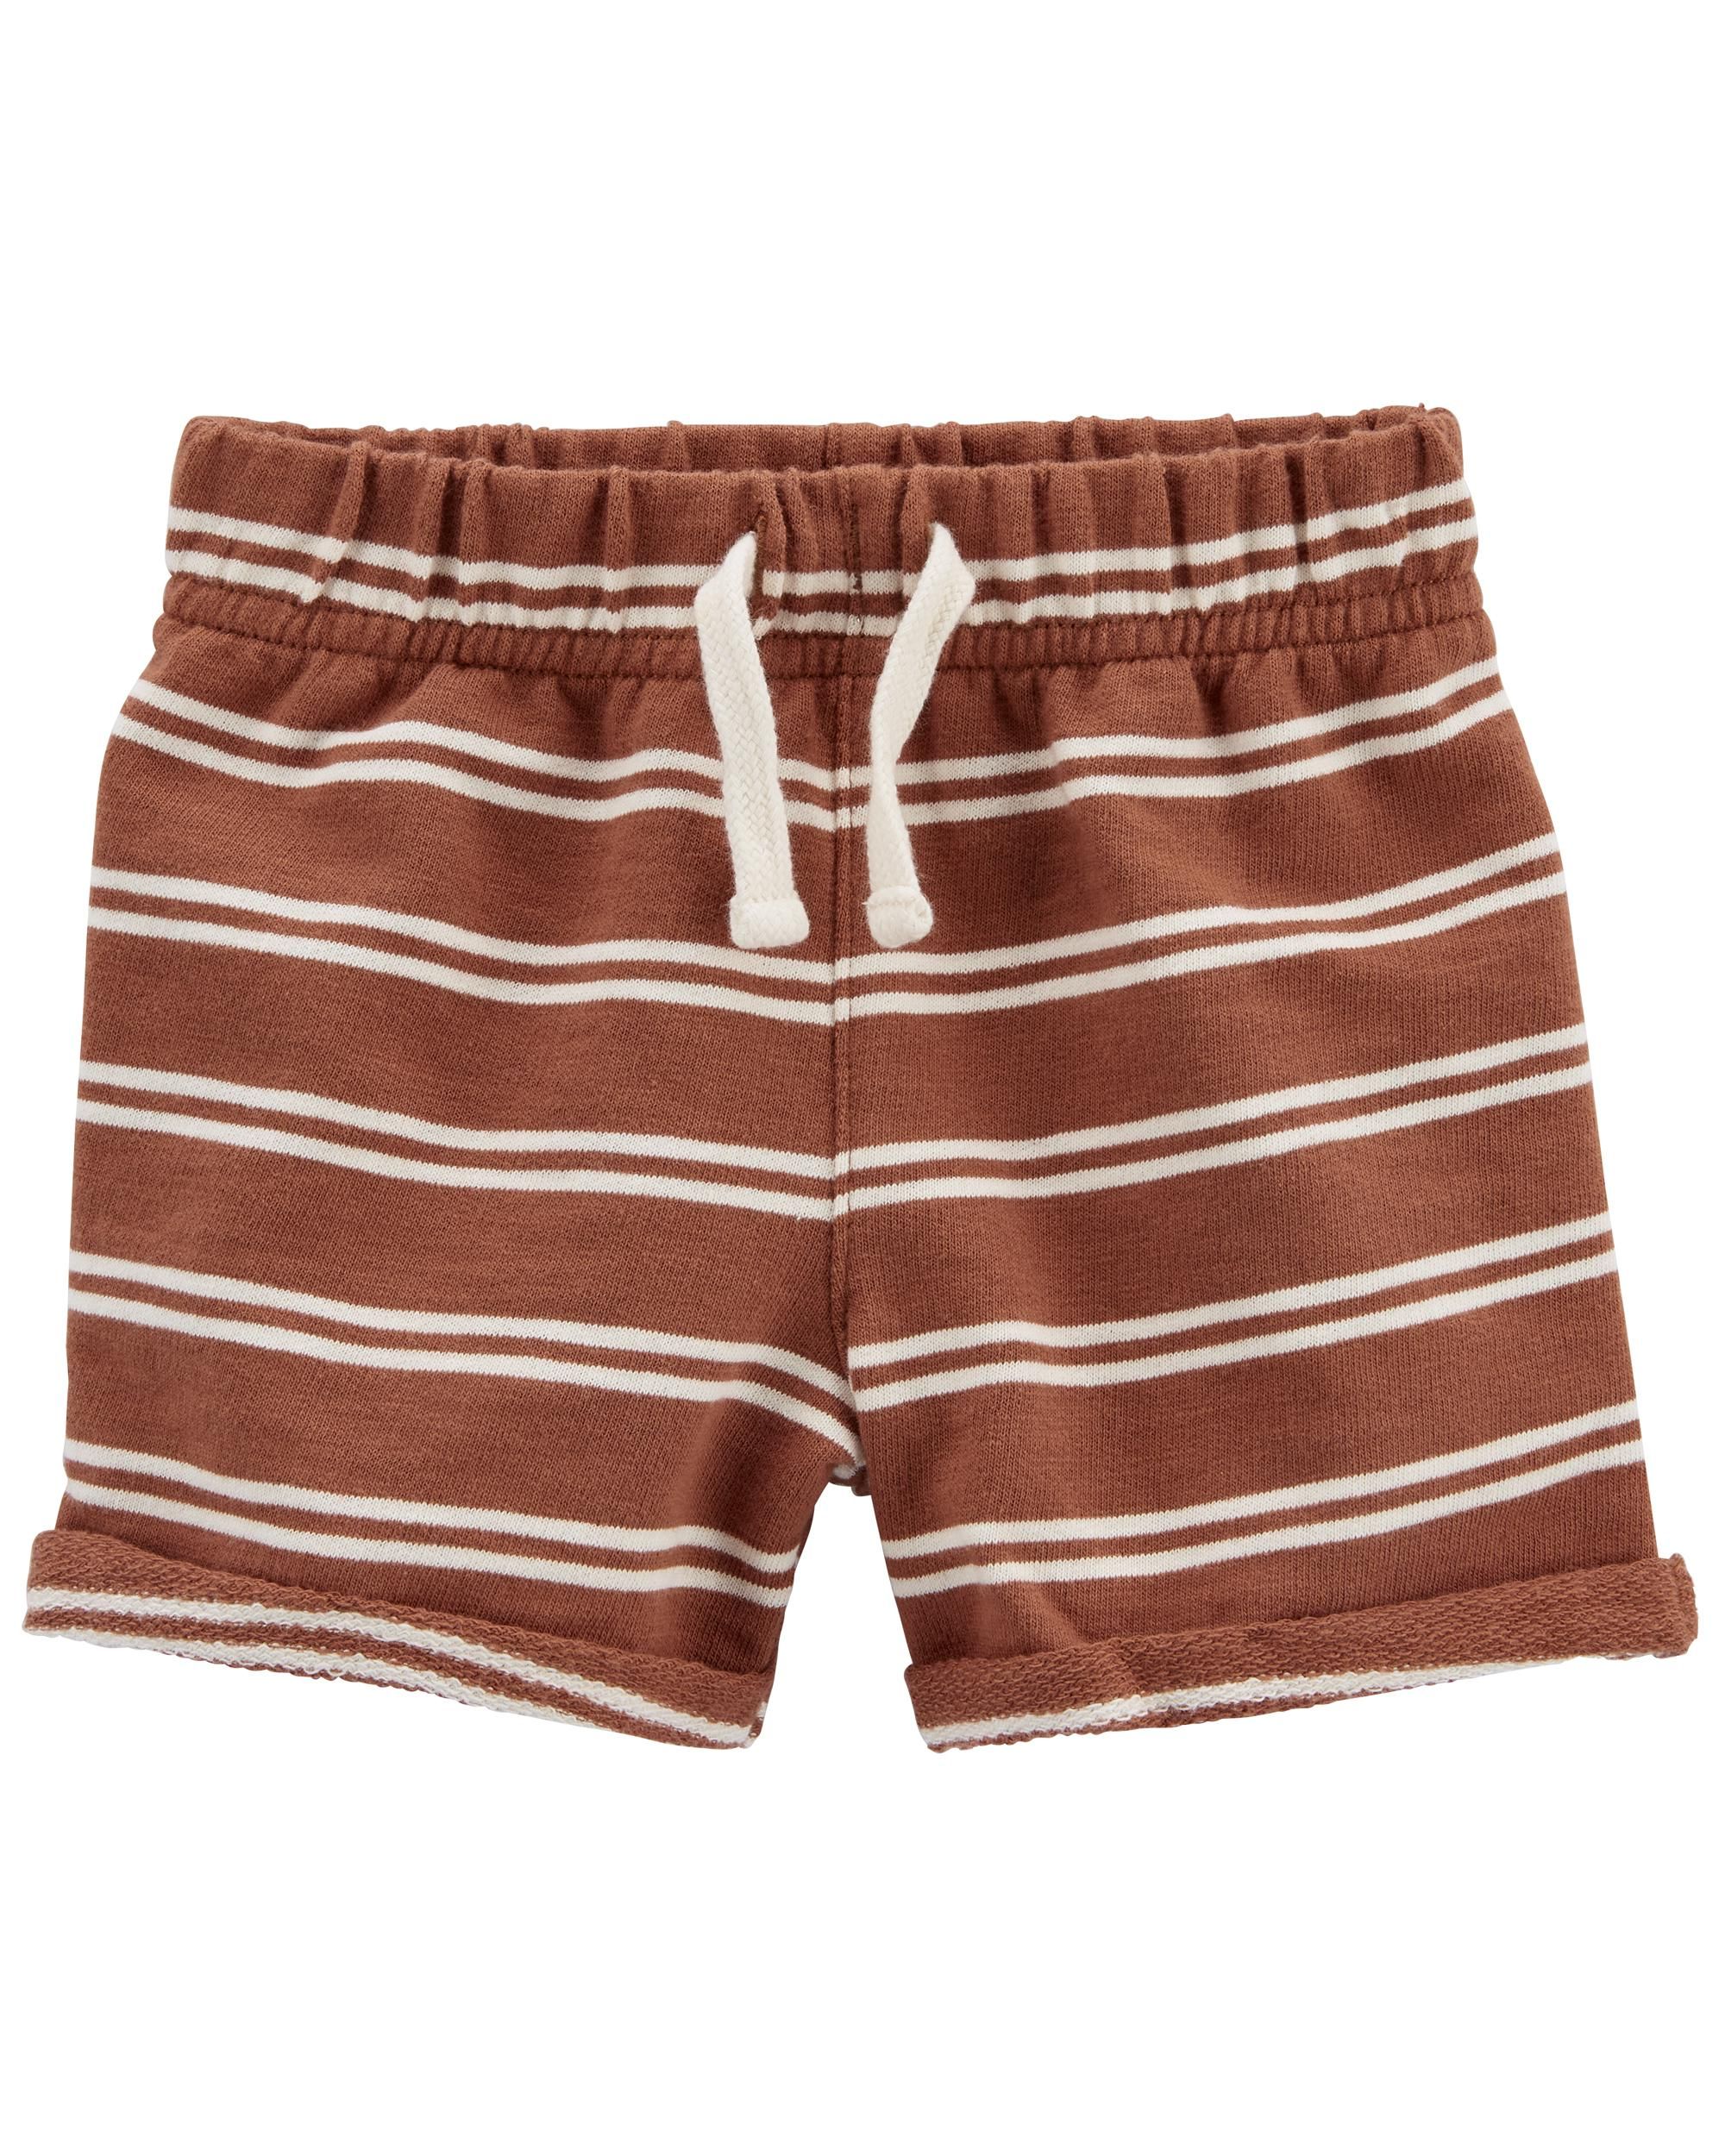 Baby Striped Pull-On Cotton Shorts | Carter's